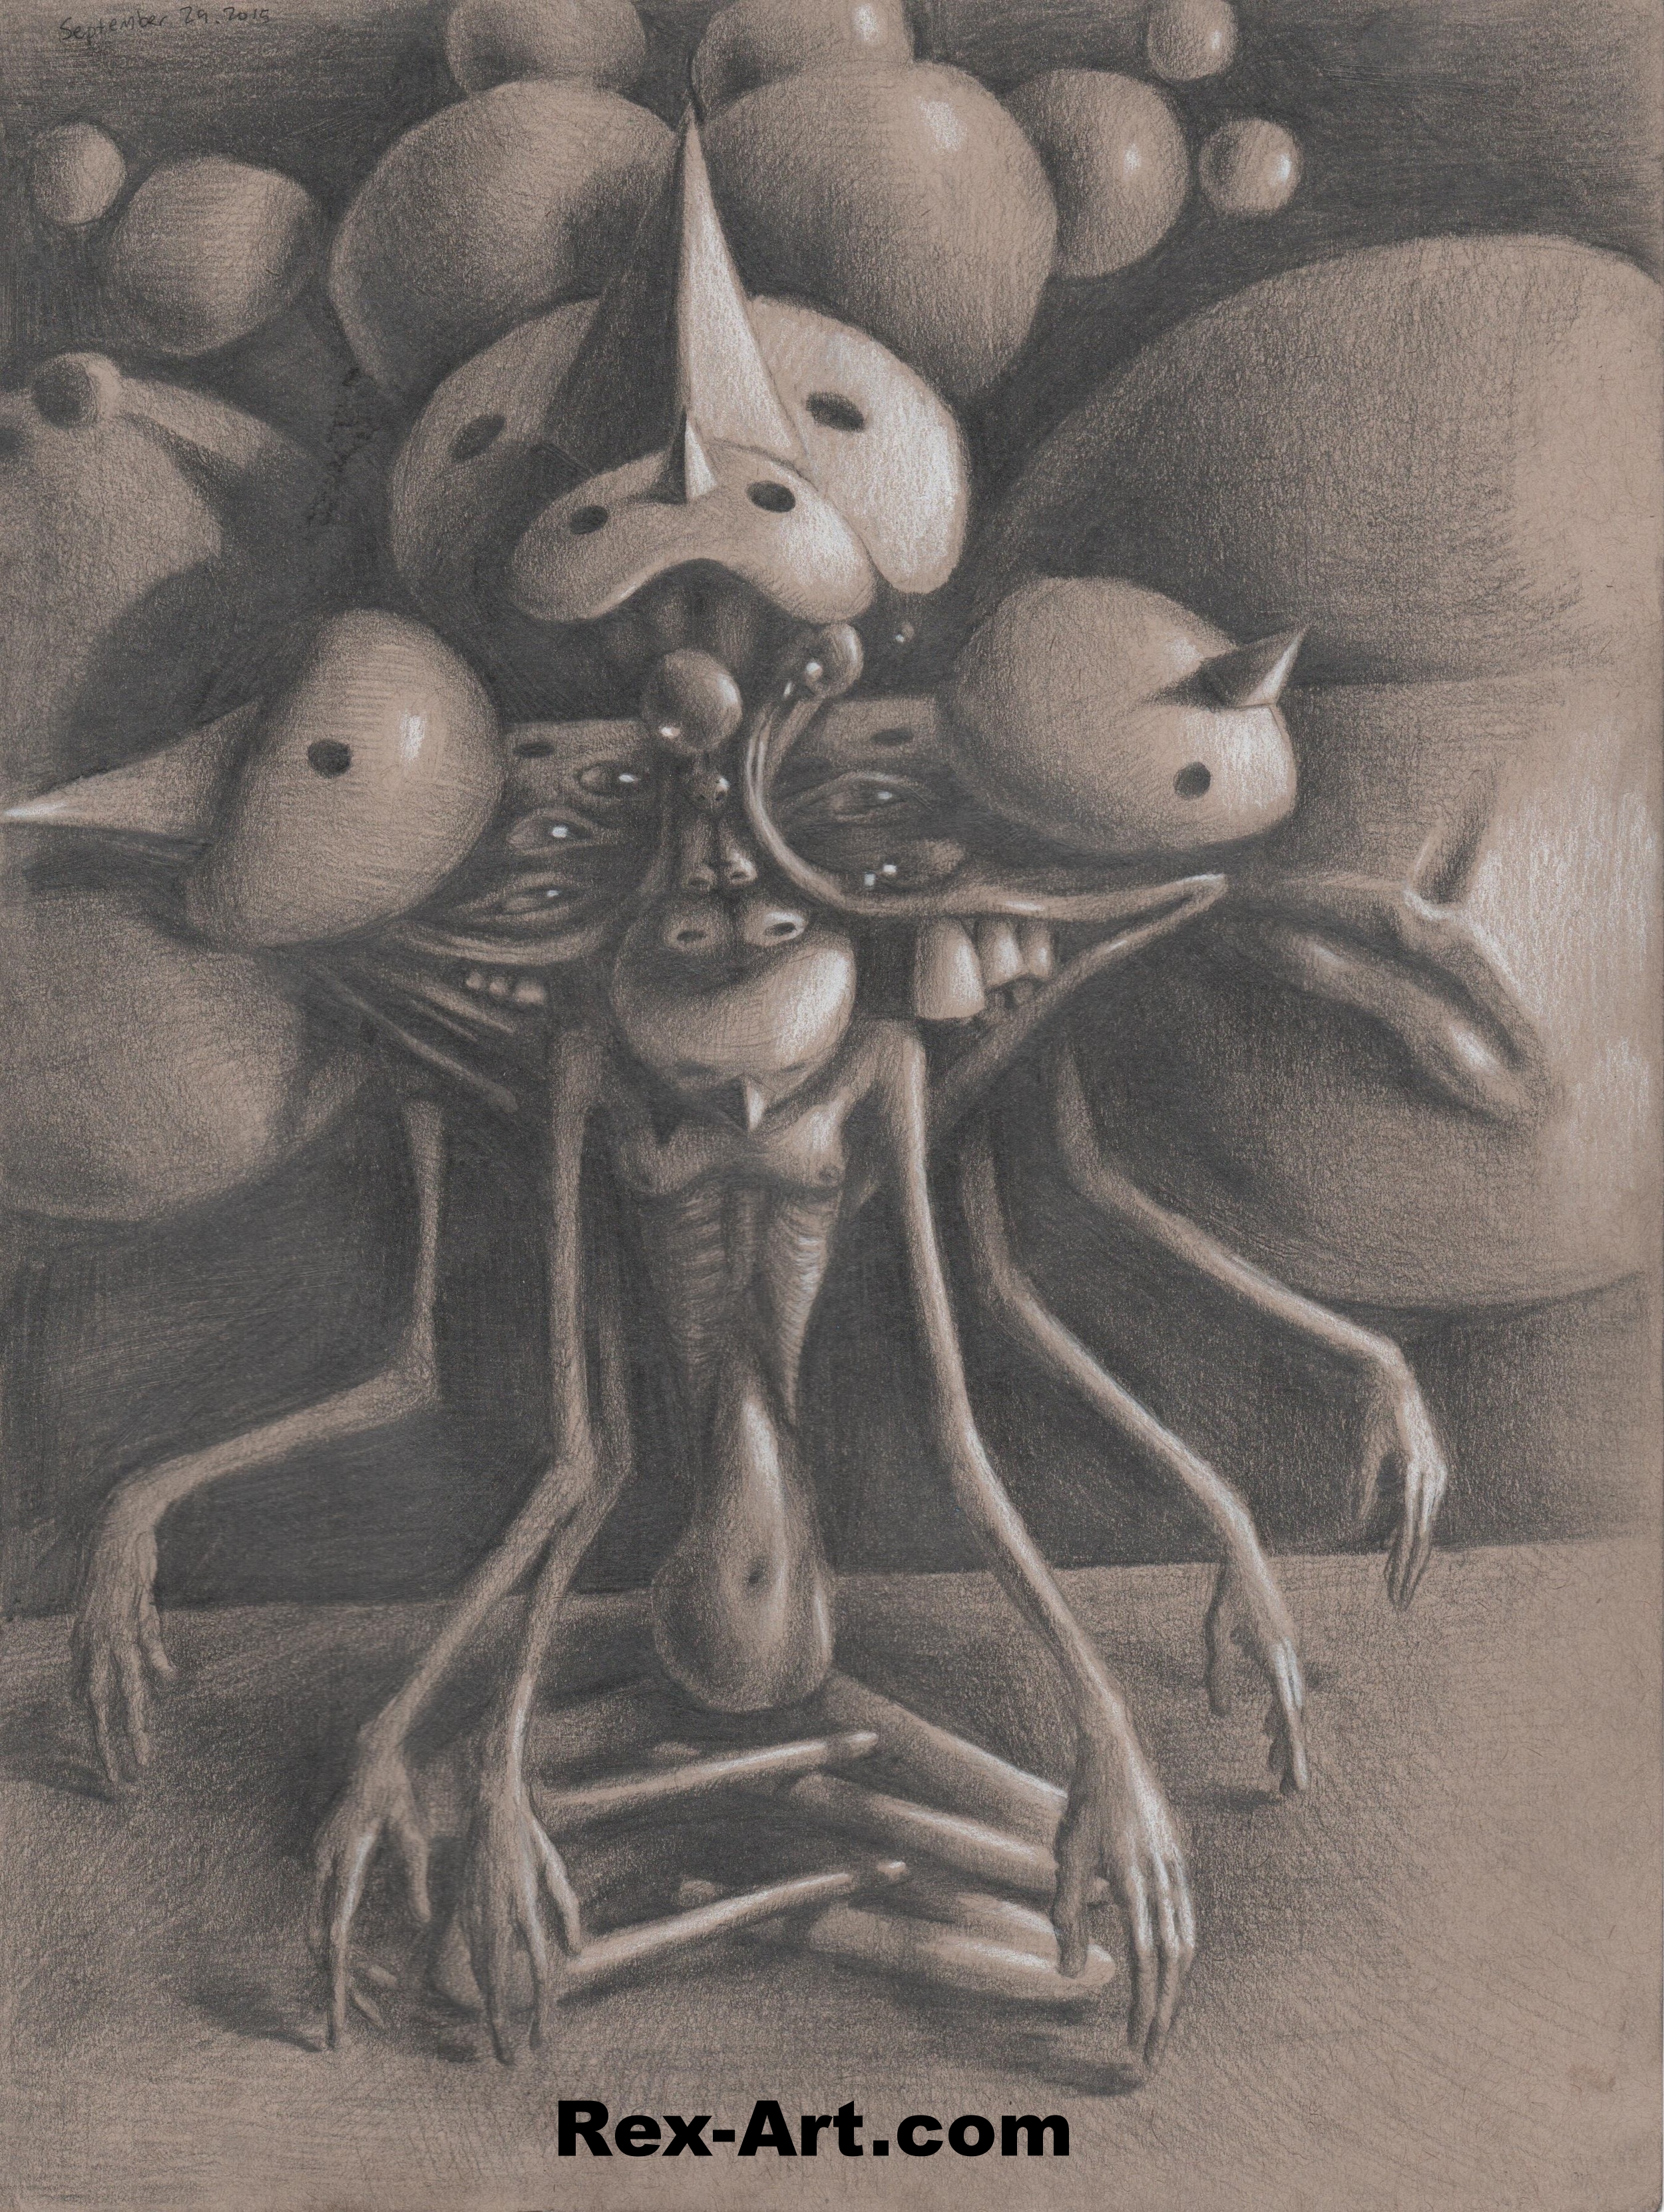   Born to Die , graphite on toned paper, 9” x 12” 